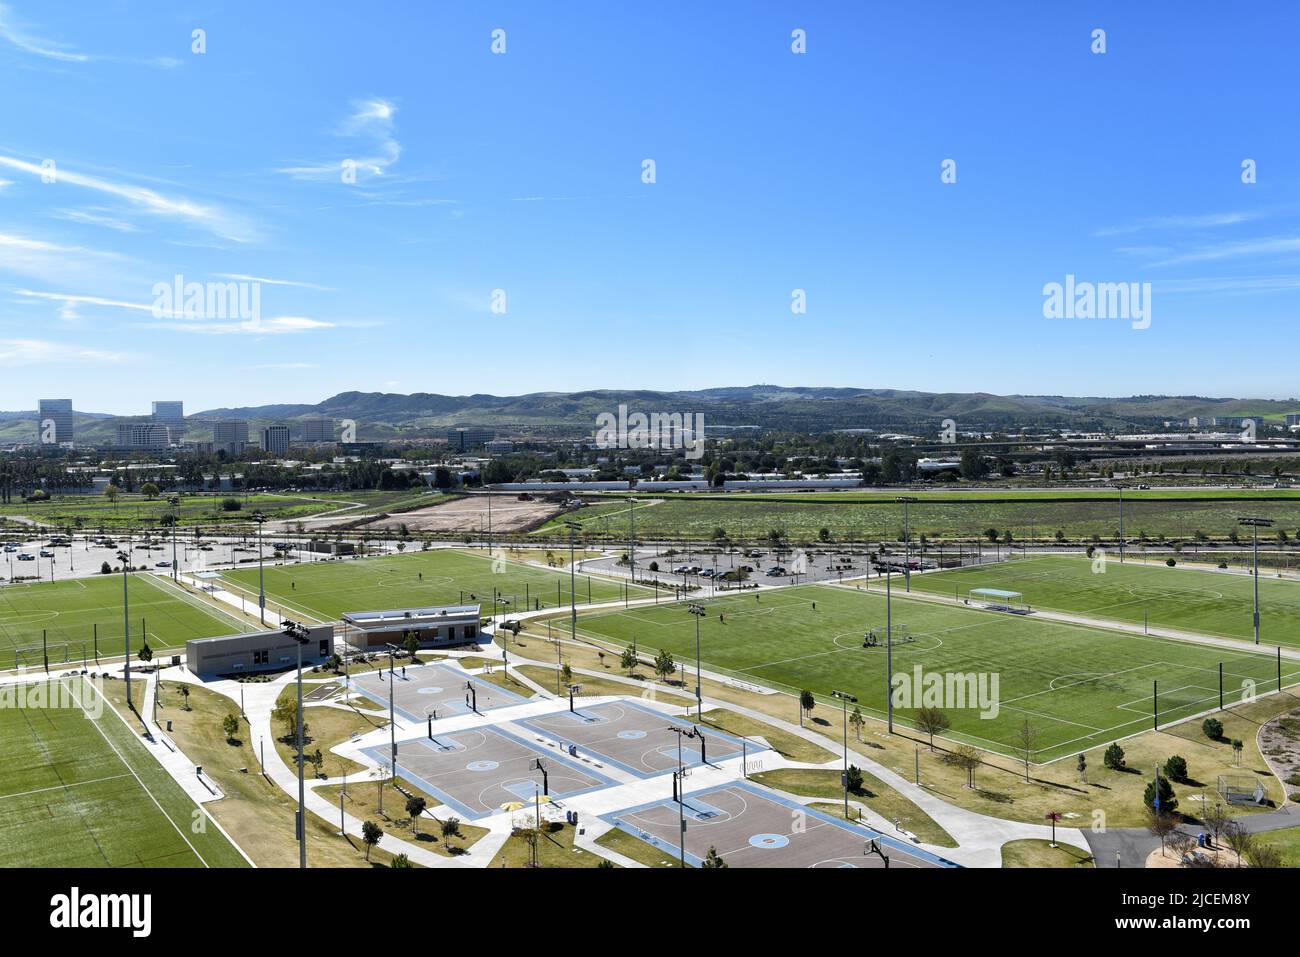 IRVINE, CALIFORNIA 31 JAN 2020: Aerial view of basketball courts at the Orange County Great Park. Stock Photo